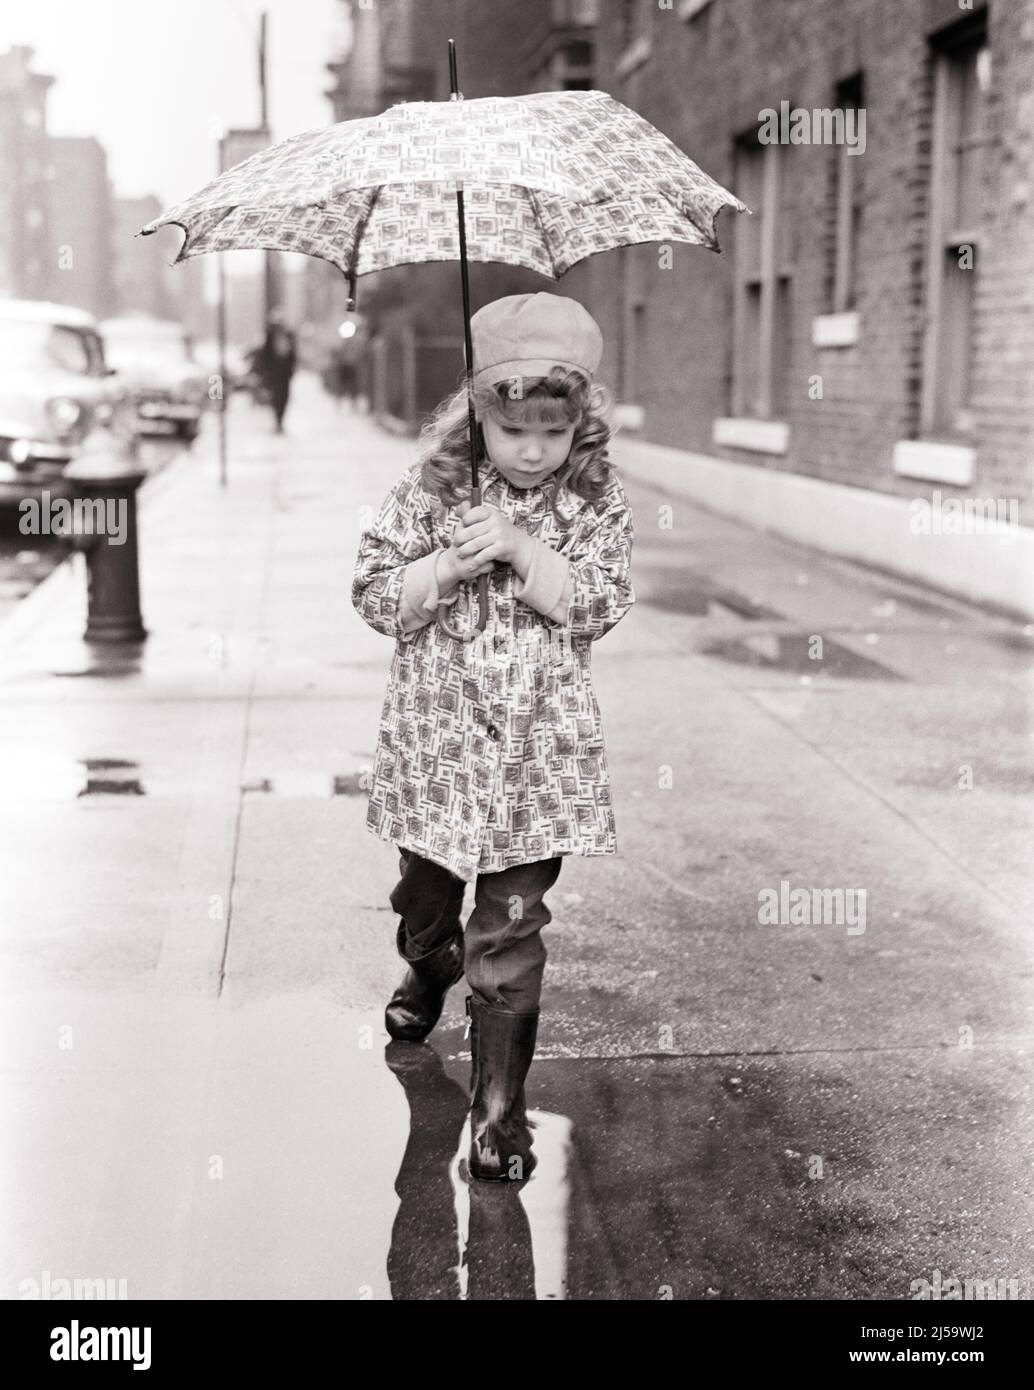 1960s CUTE LITTLE GIRL ON CITY SIDEWALK IN RAIN WEARING RAINCOAT HAT BOOTS CARRYING UMBRELLA CAREFULLY STEPPING INTO A PUDDLE - j11982 HAR001 HARS RAINCOAT WINNING STEPPING HOME LIFE NATURE COPY SPACE FULL-LENGTH RAINY RAINING EXPRESSIONS B&W HIGH ANGLE ADVENTURE DISCOVERY PROTECTION CONCERN CONCEPTUAL CITIES PLEASANT PUDDLES AGREEABLE CAREFULLY CAUTIOUS CHARMING GROWTH JUVENILES LOVABLE PLEASING ADORABLE APPEALING BLACK AND WHITE CAUCASIAN ETHNICITY HAR001 OLD FASHIONED PUDDLE Stock Photo